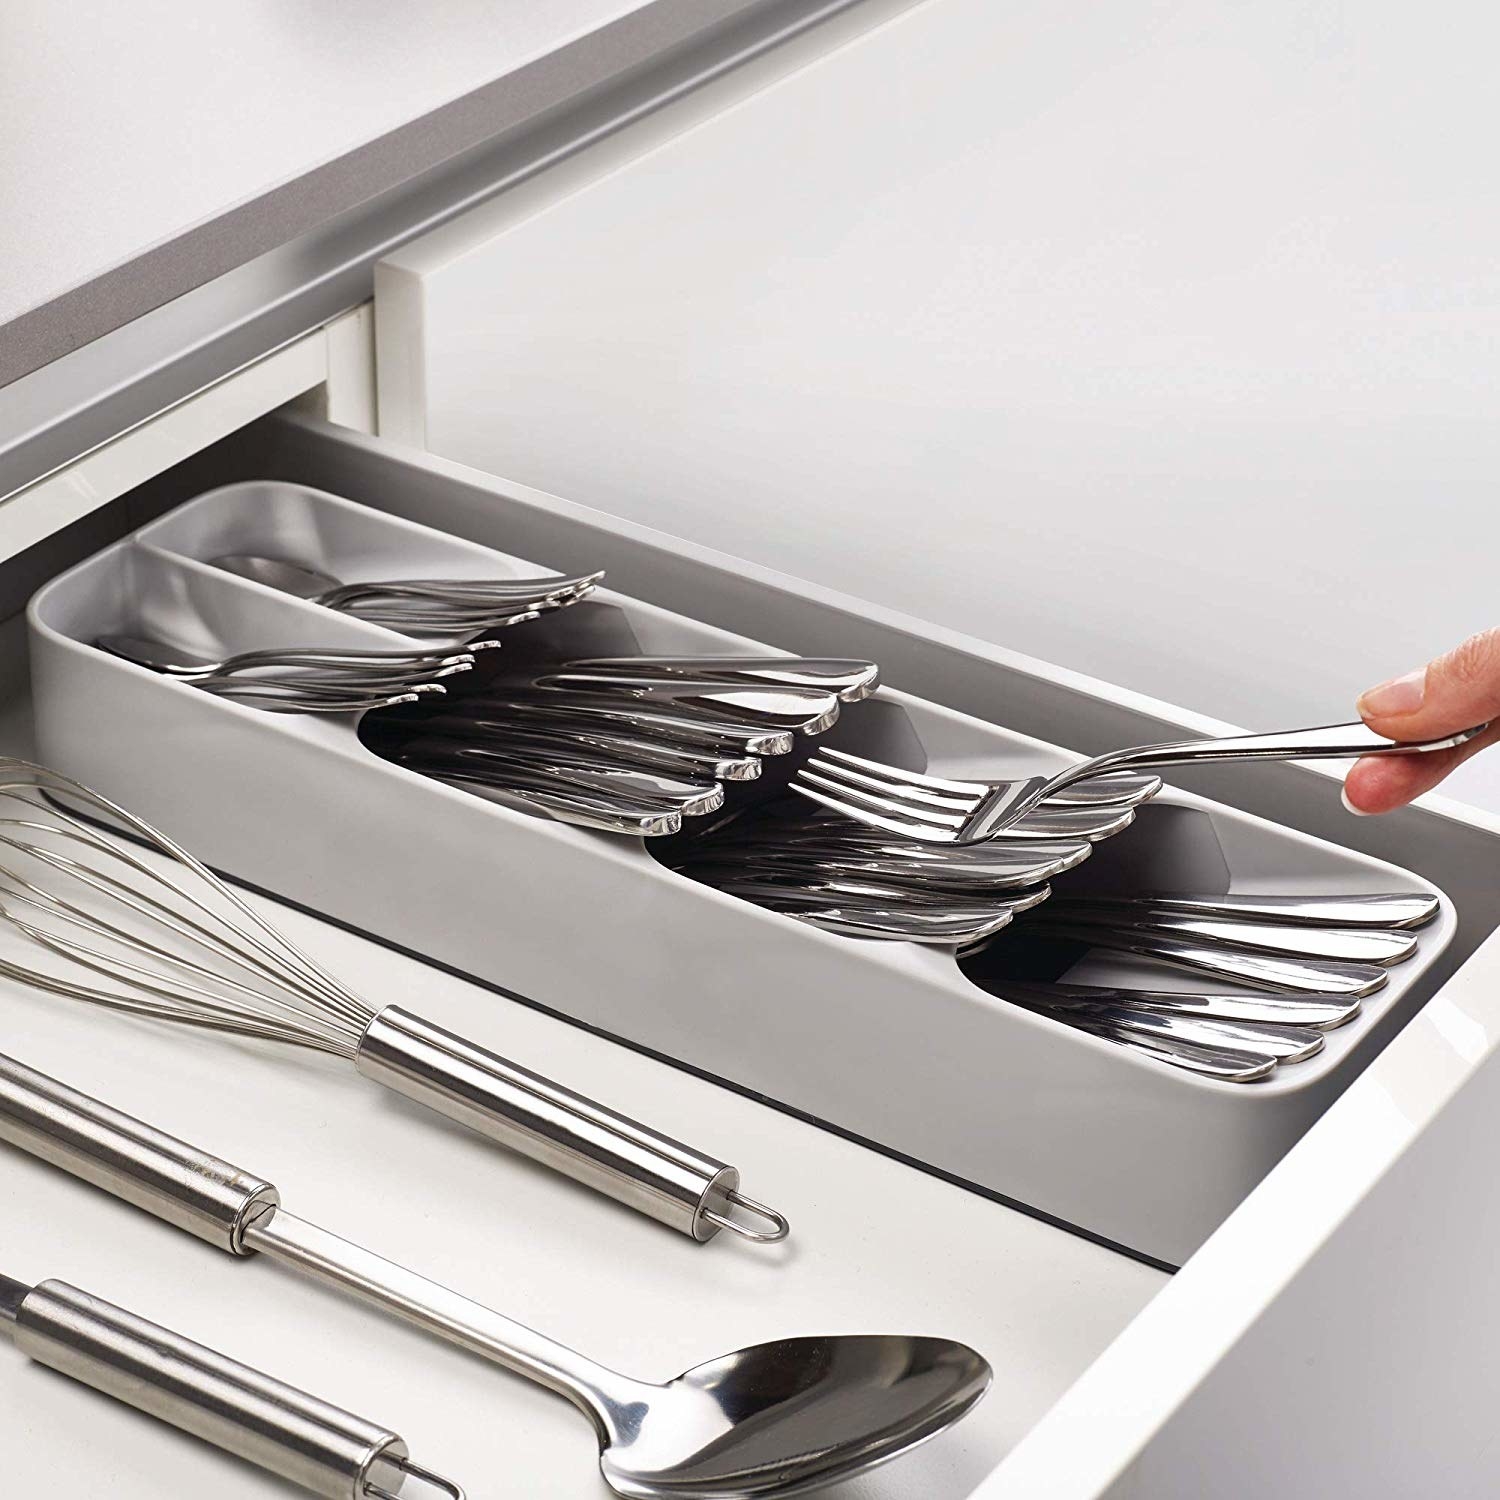 A person putting a fork into the divided cutlery holder